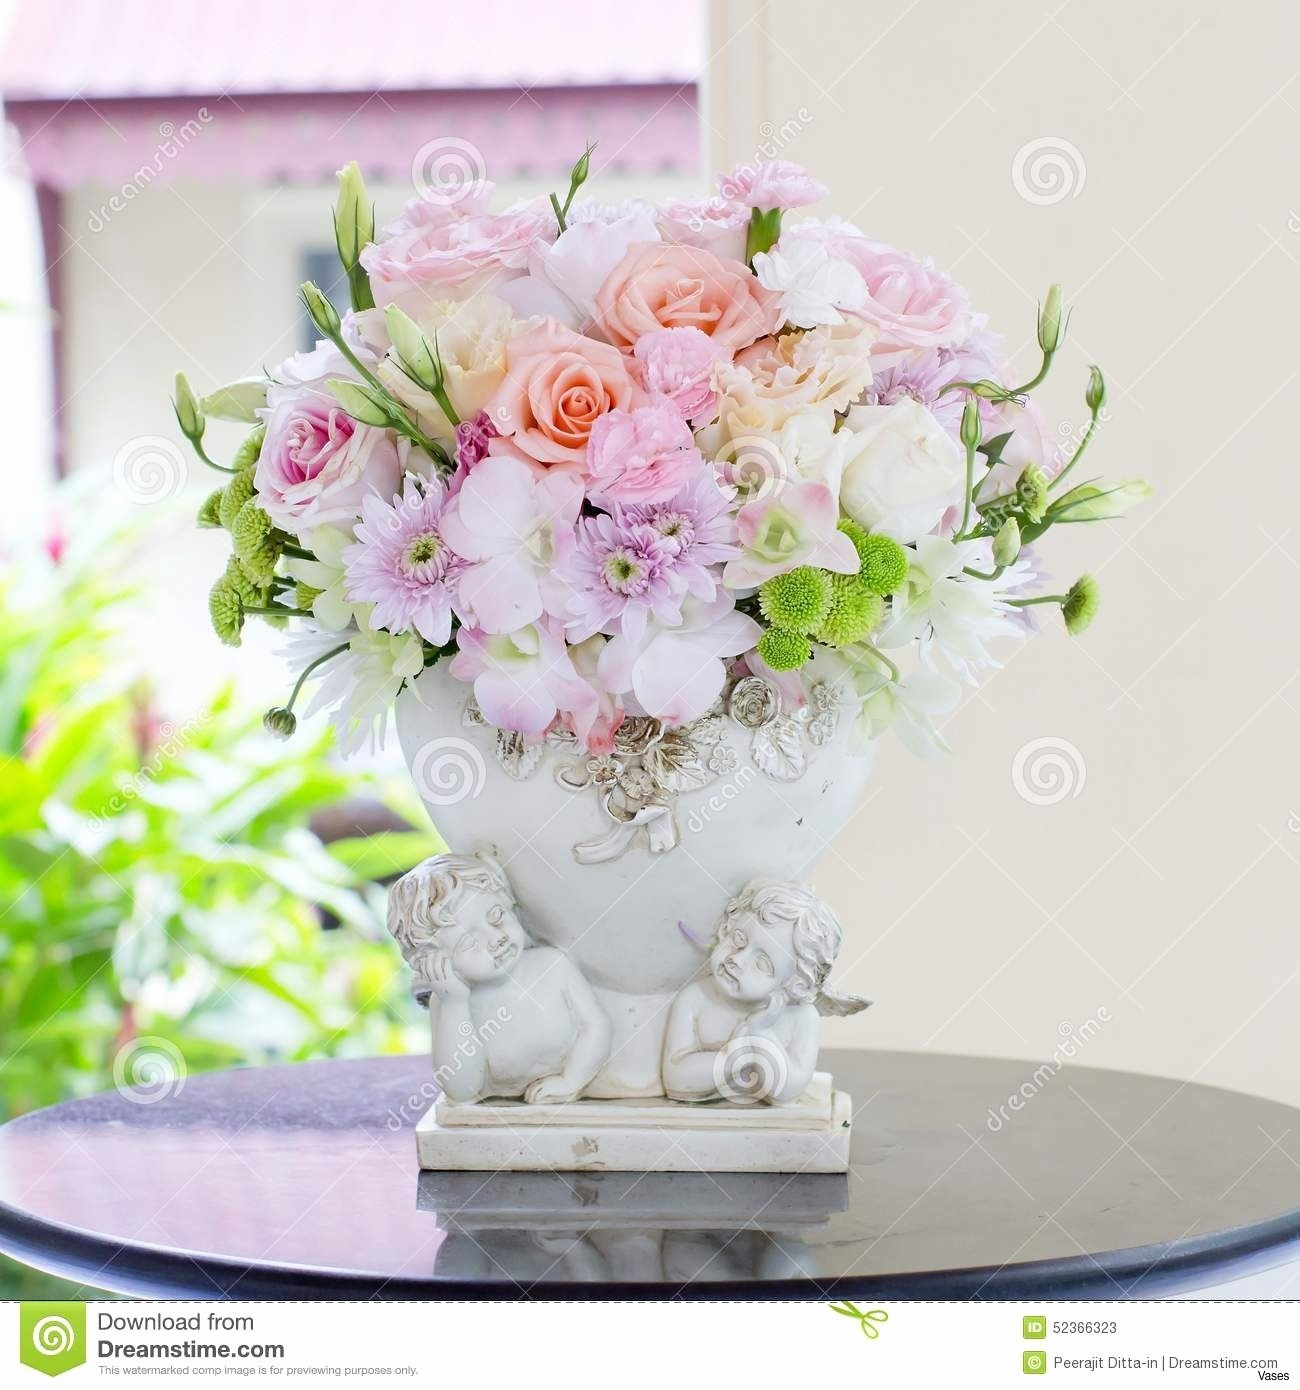 27 Recommended Hydrangea Flowers In A Vase 2024 free download hydrangea flowers in a vase of awesome winter flower photos natural zoom with regard to flower arrangements elegant floral arrangements 0d design ideas design ideas hydrangea centerpieces